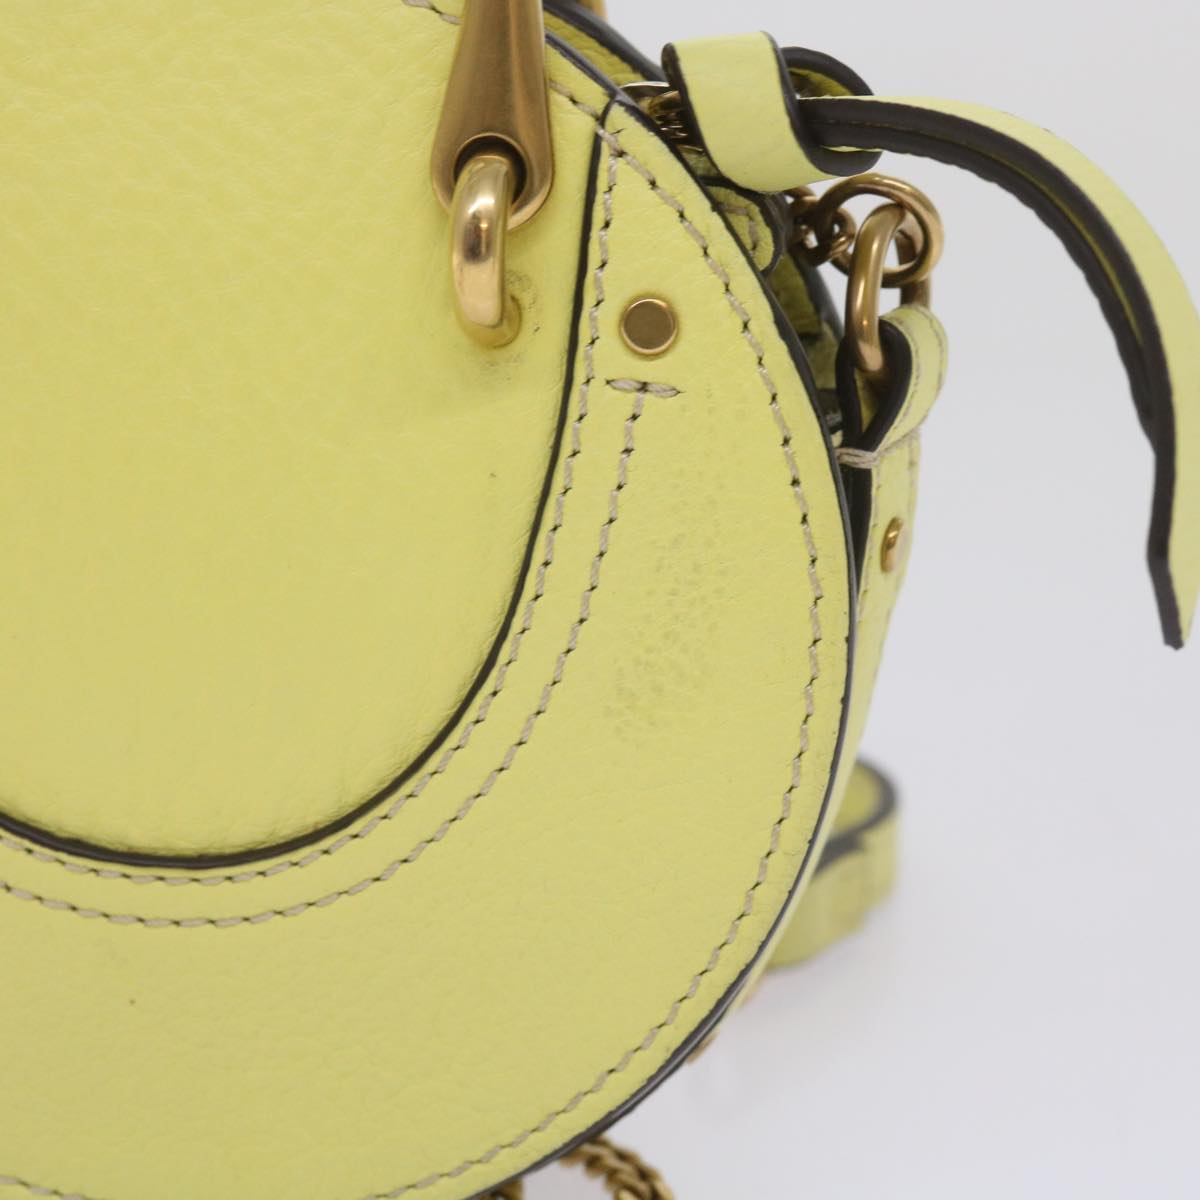 Chloe Pixy Hand Bag Suede Leather 2way Yellow Auth 65664